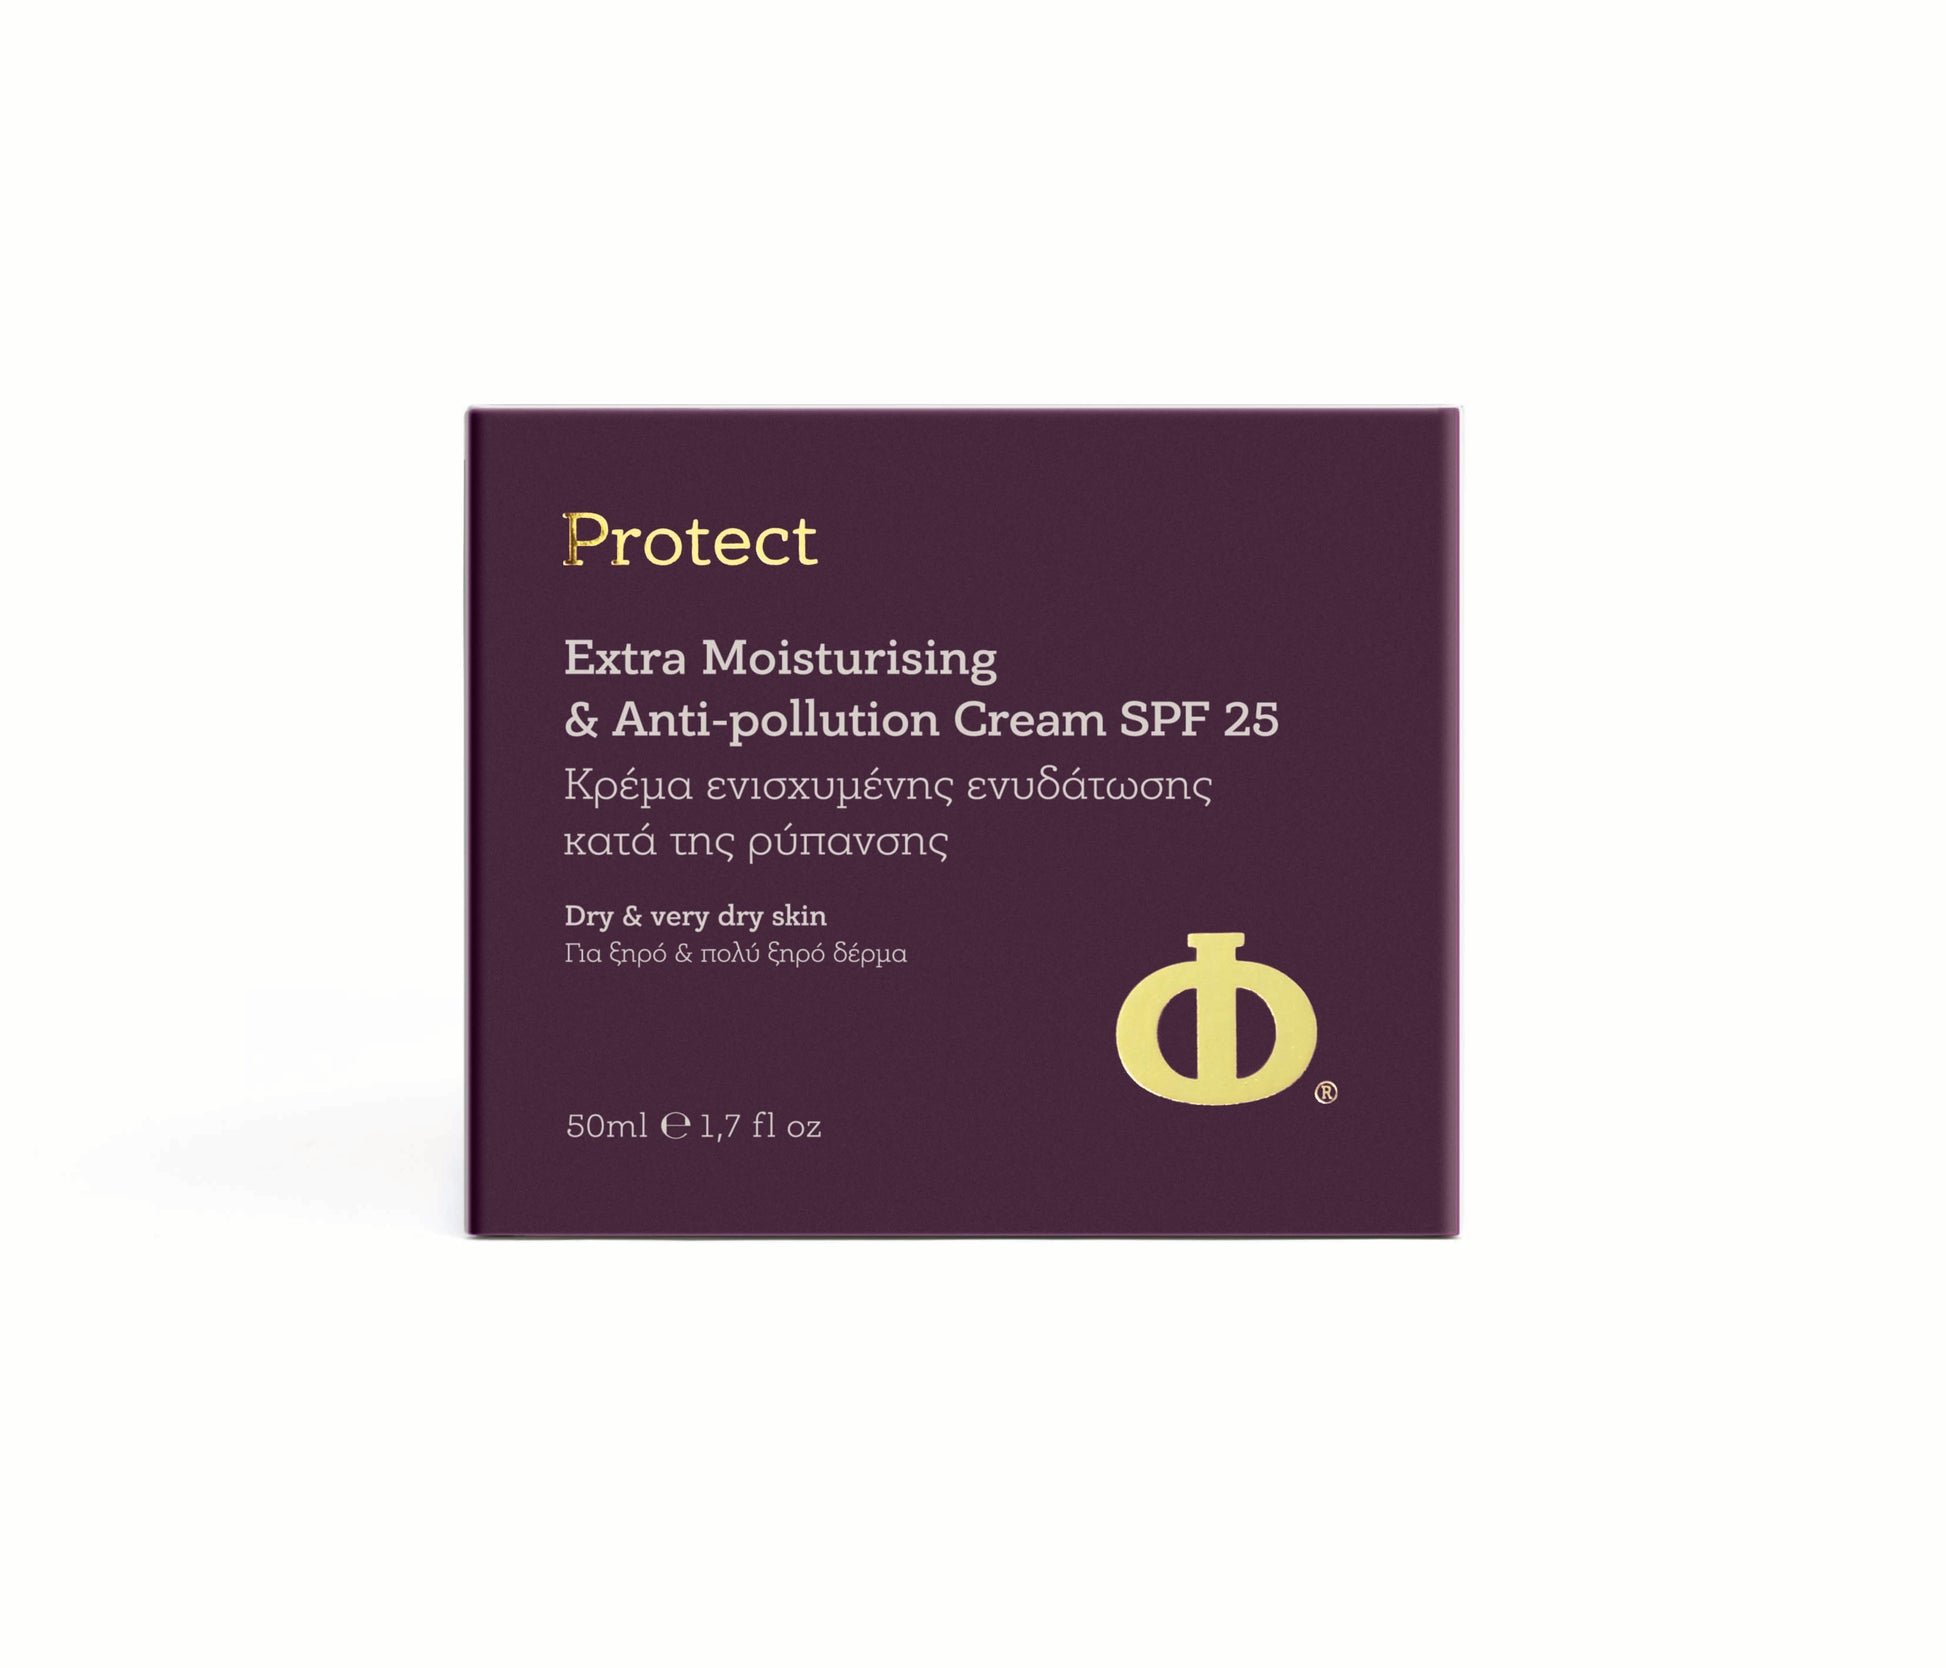 Philab Extra Moisturising Cream SPF25 packaging with purple background and gold logo.